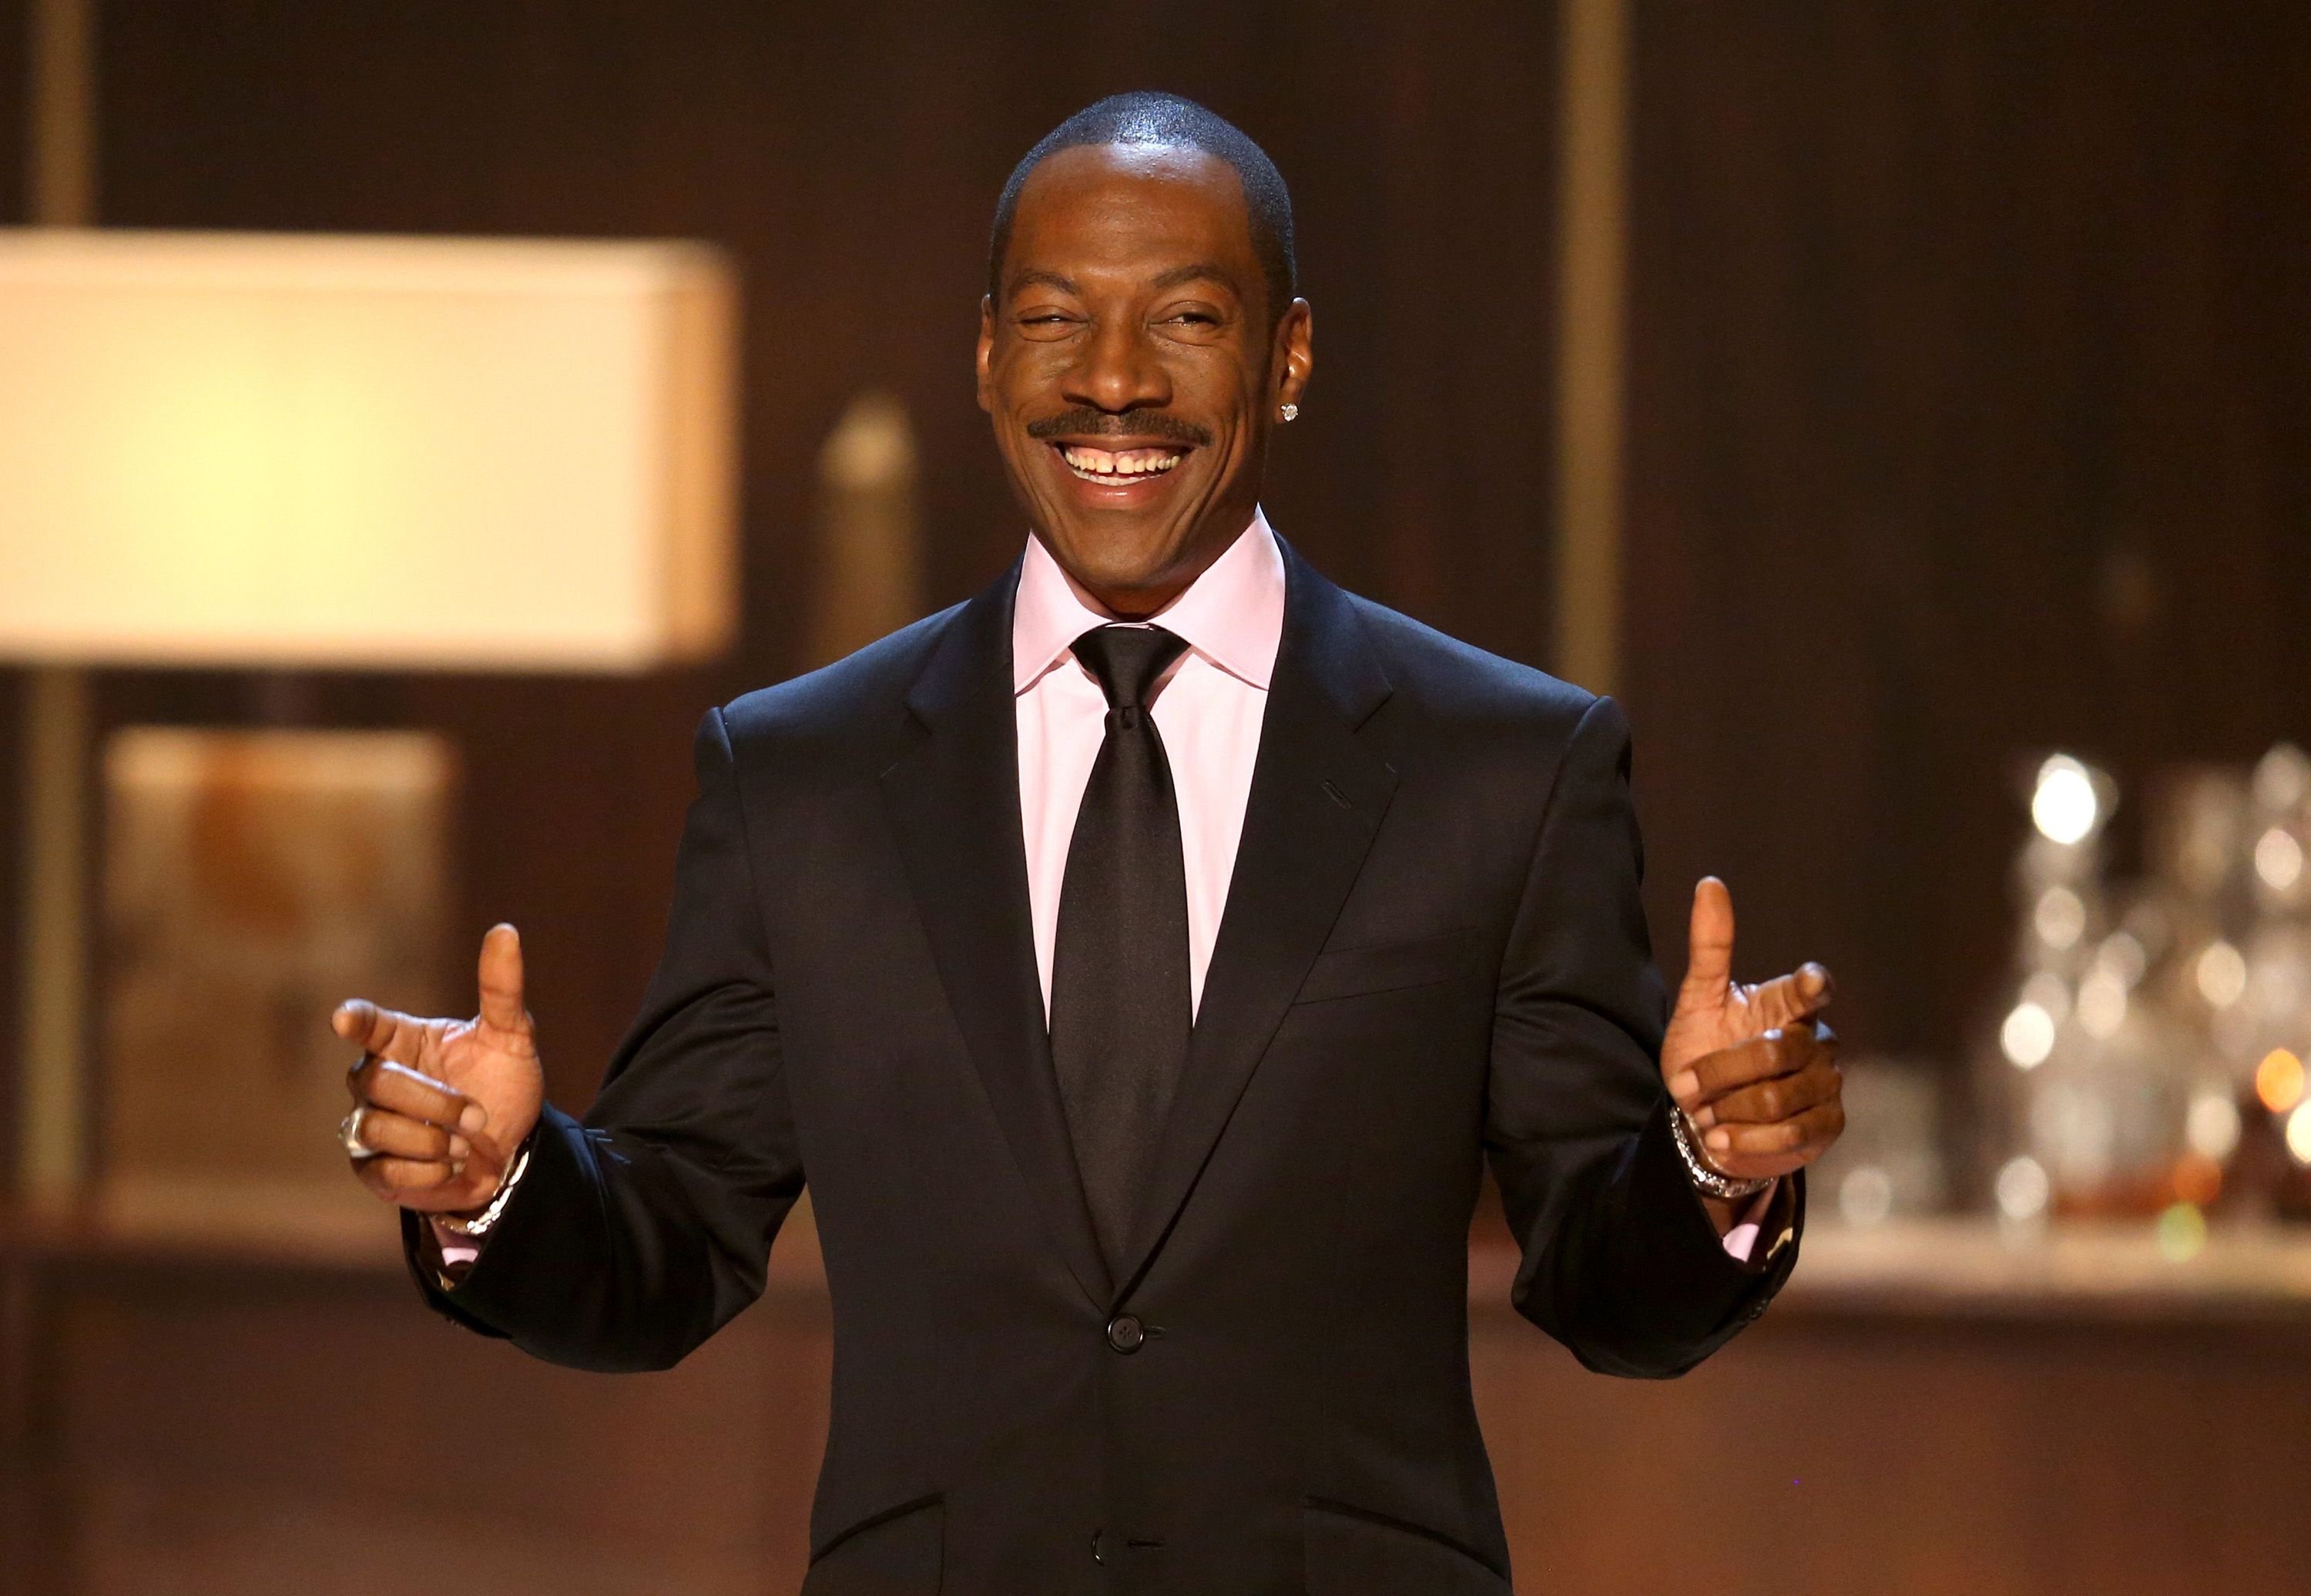 Comedian Eddie Murphy at Spike TV's "Eddie Murphy: One Night Only" at the Saban Theatre on November 3, 2012. | Photo: Getty Images